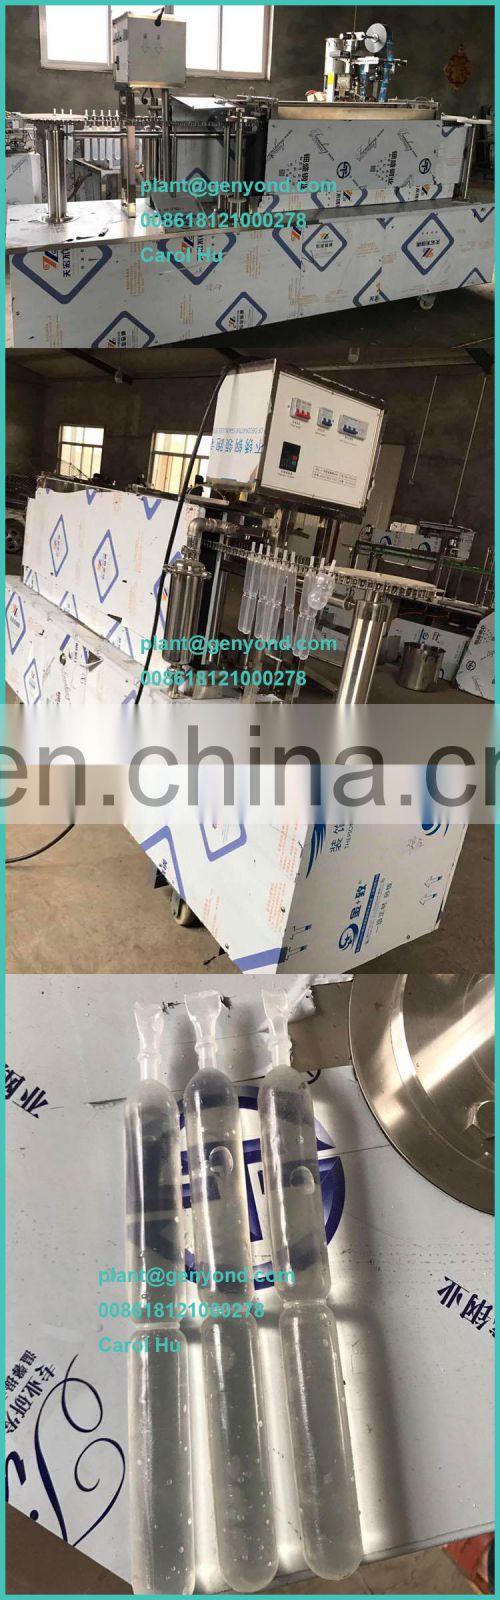 Factory Genyond 6000-15000 pcs/h ice pops drink making plant production line ice lolly soft tube filling sealing machine